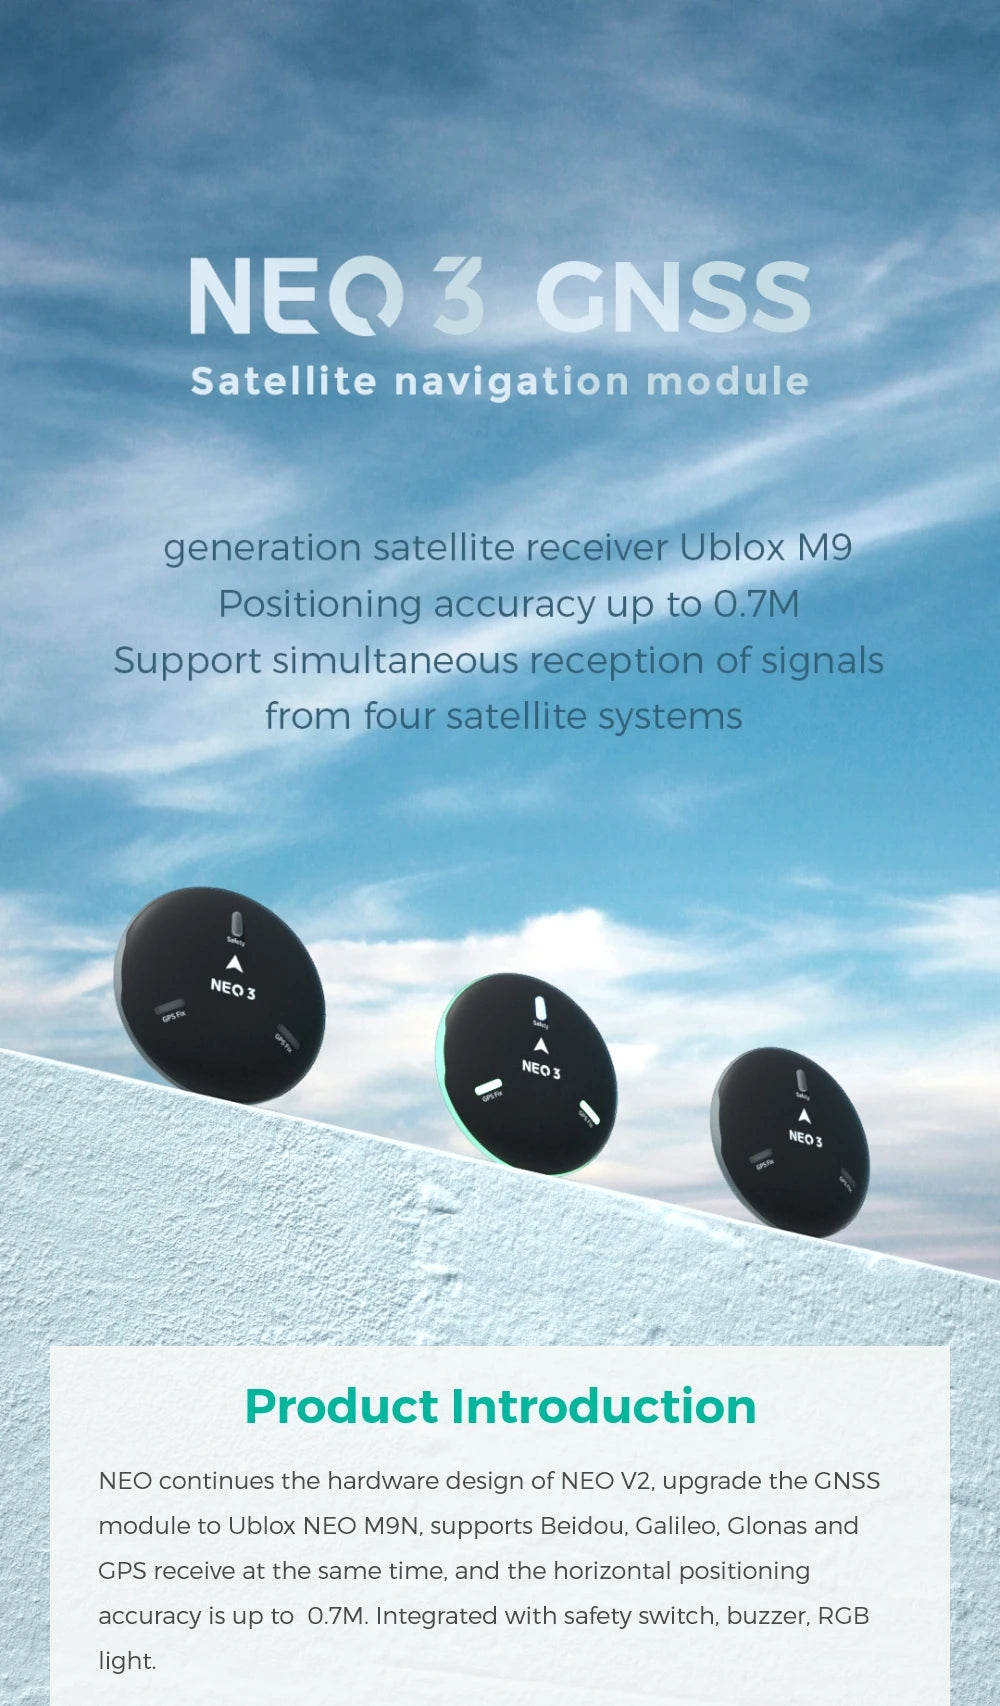 CUAV New NEO 3 U-blox M9N GPS, NEO continues the hardware design of NEO VZ, upgrade the GNSS module to